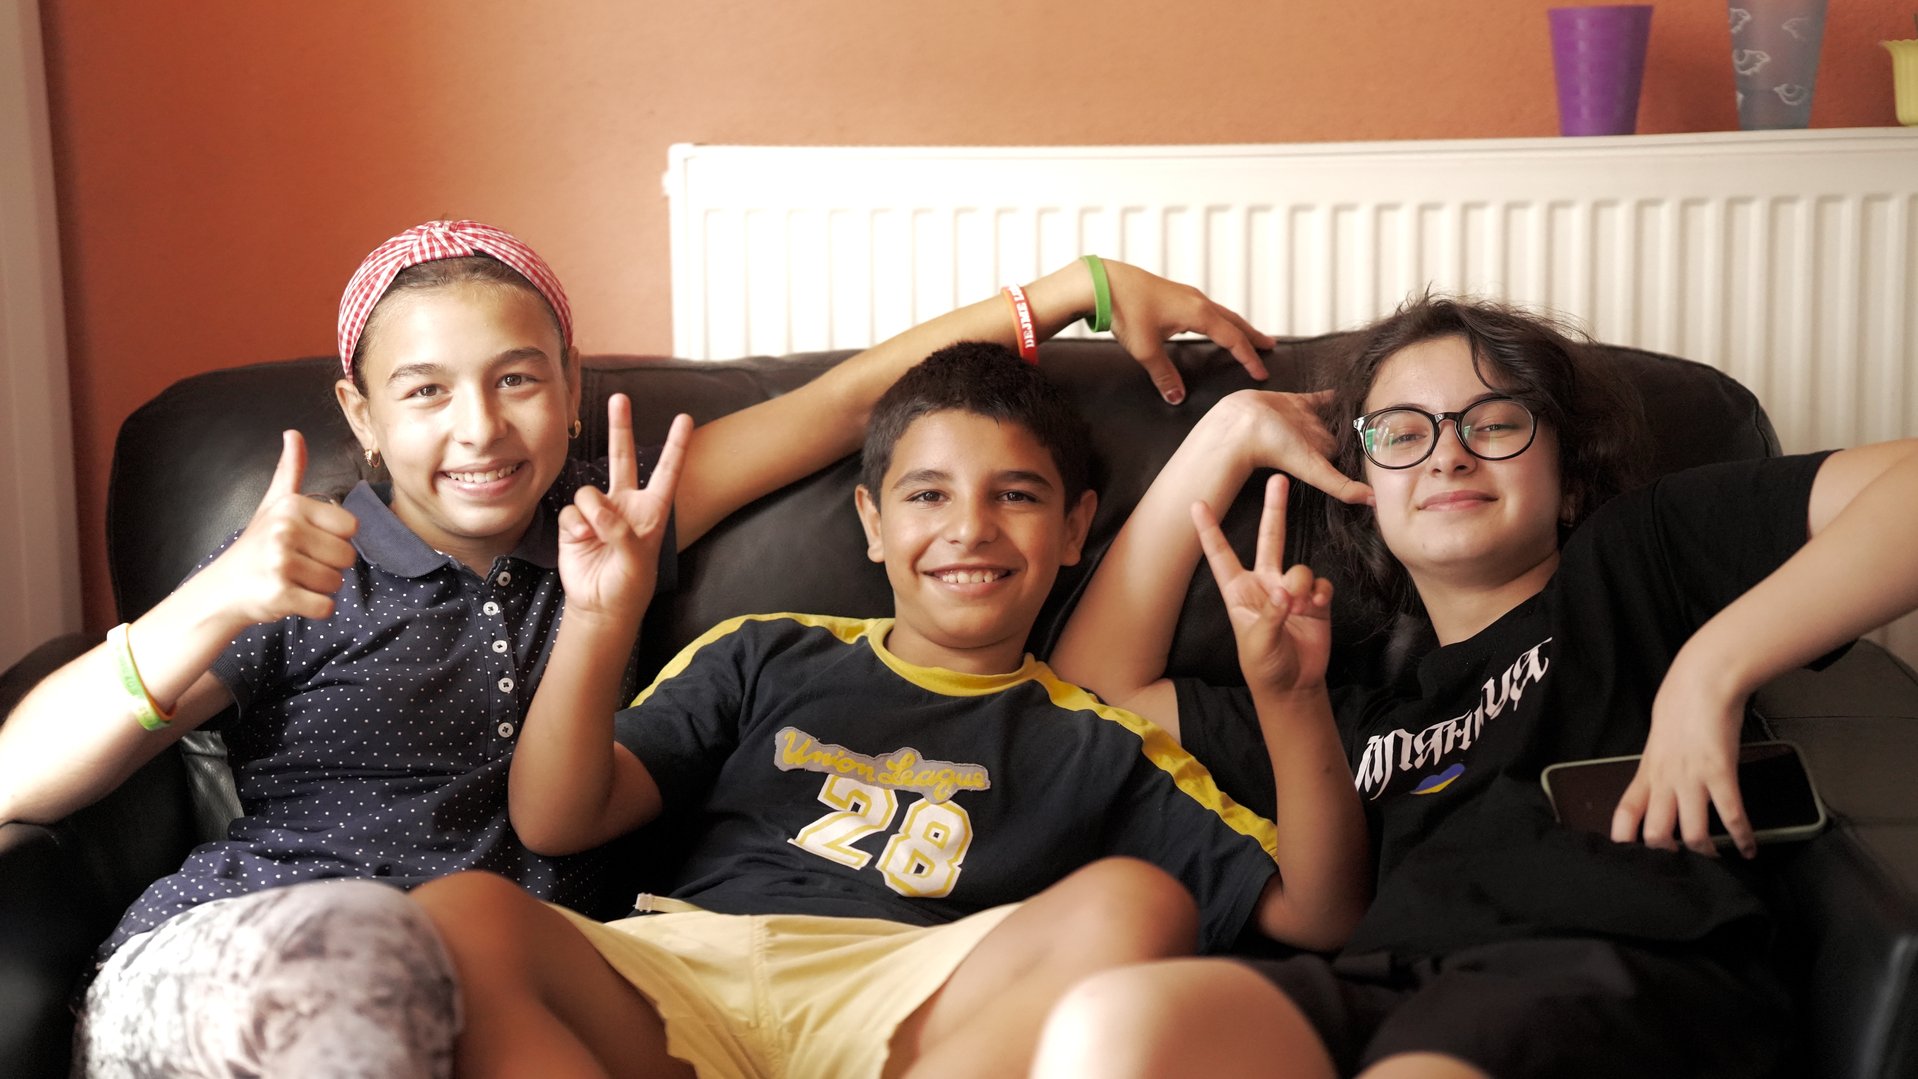 Roda (12) smiling with two friends on a couch in a shelter in Ukraine